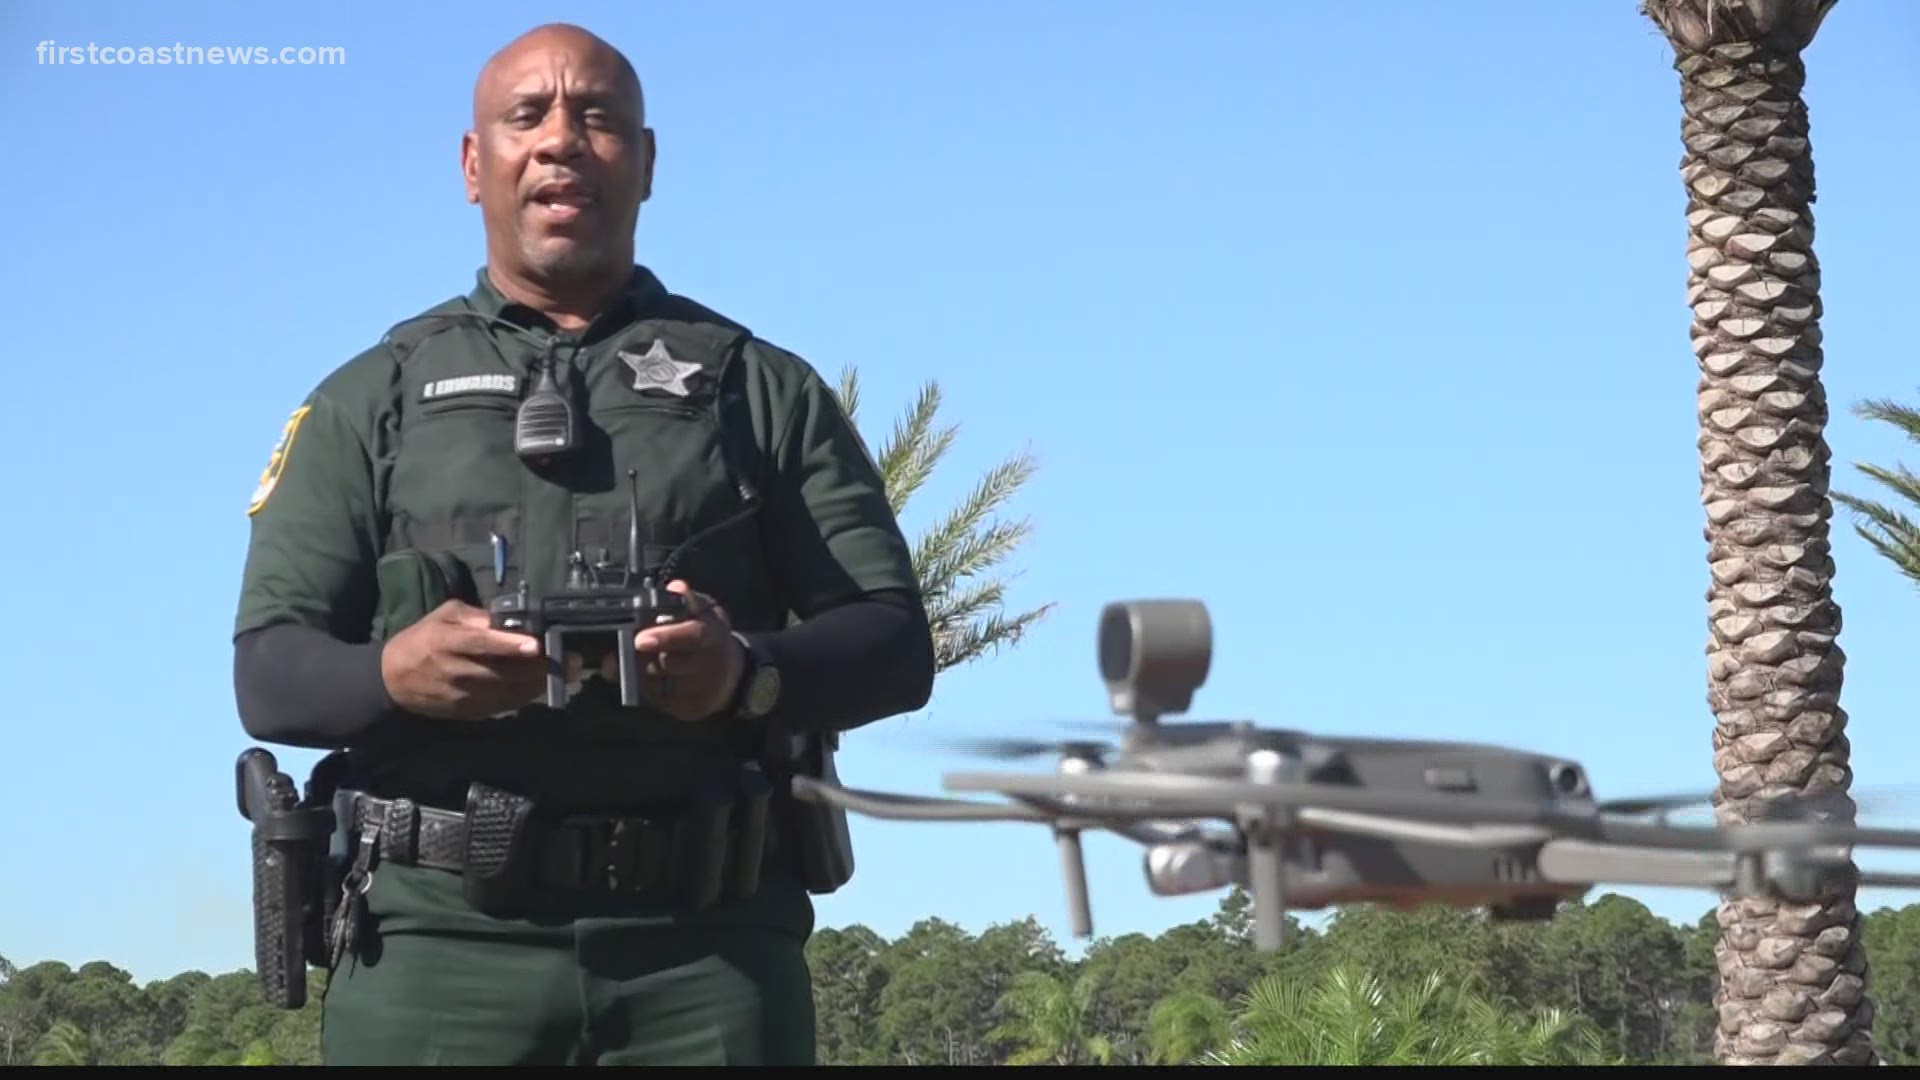 St. John's County is using drones to help solve crimes and keep the community safer.